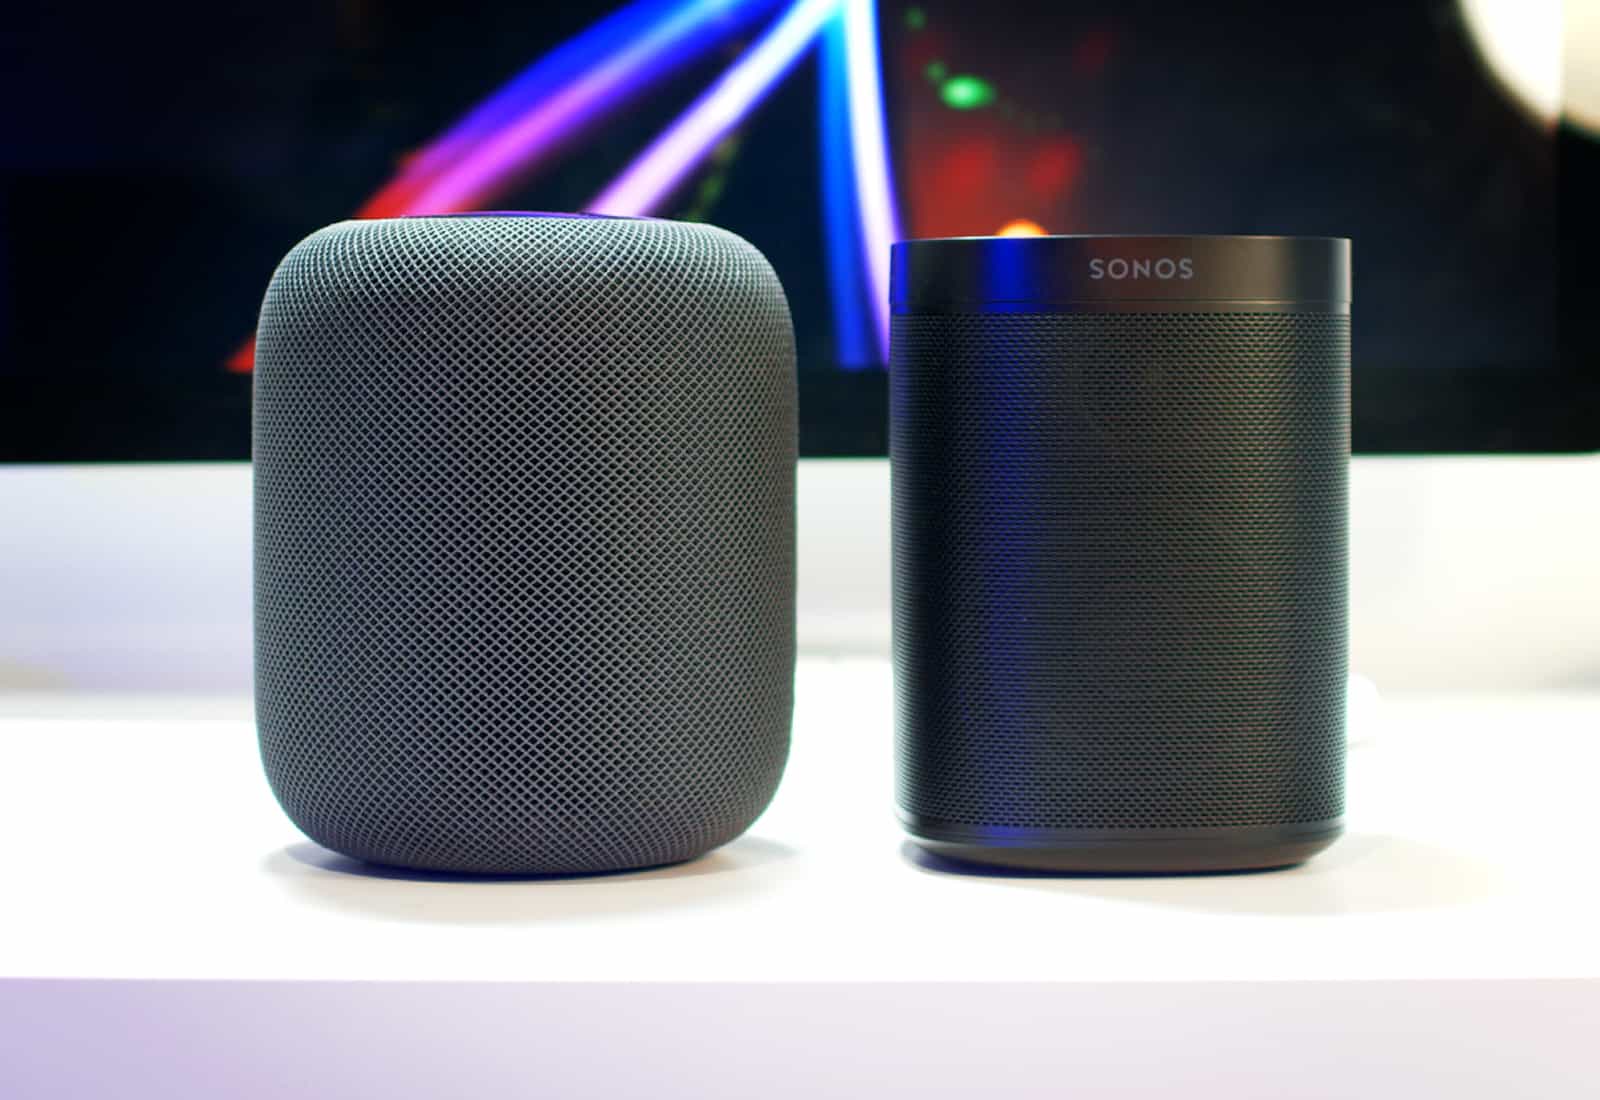 HomePod vs. Sonos One: Which should you buy? | Cult of Mac1600 x 1100